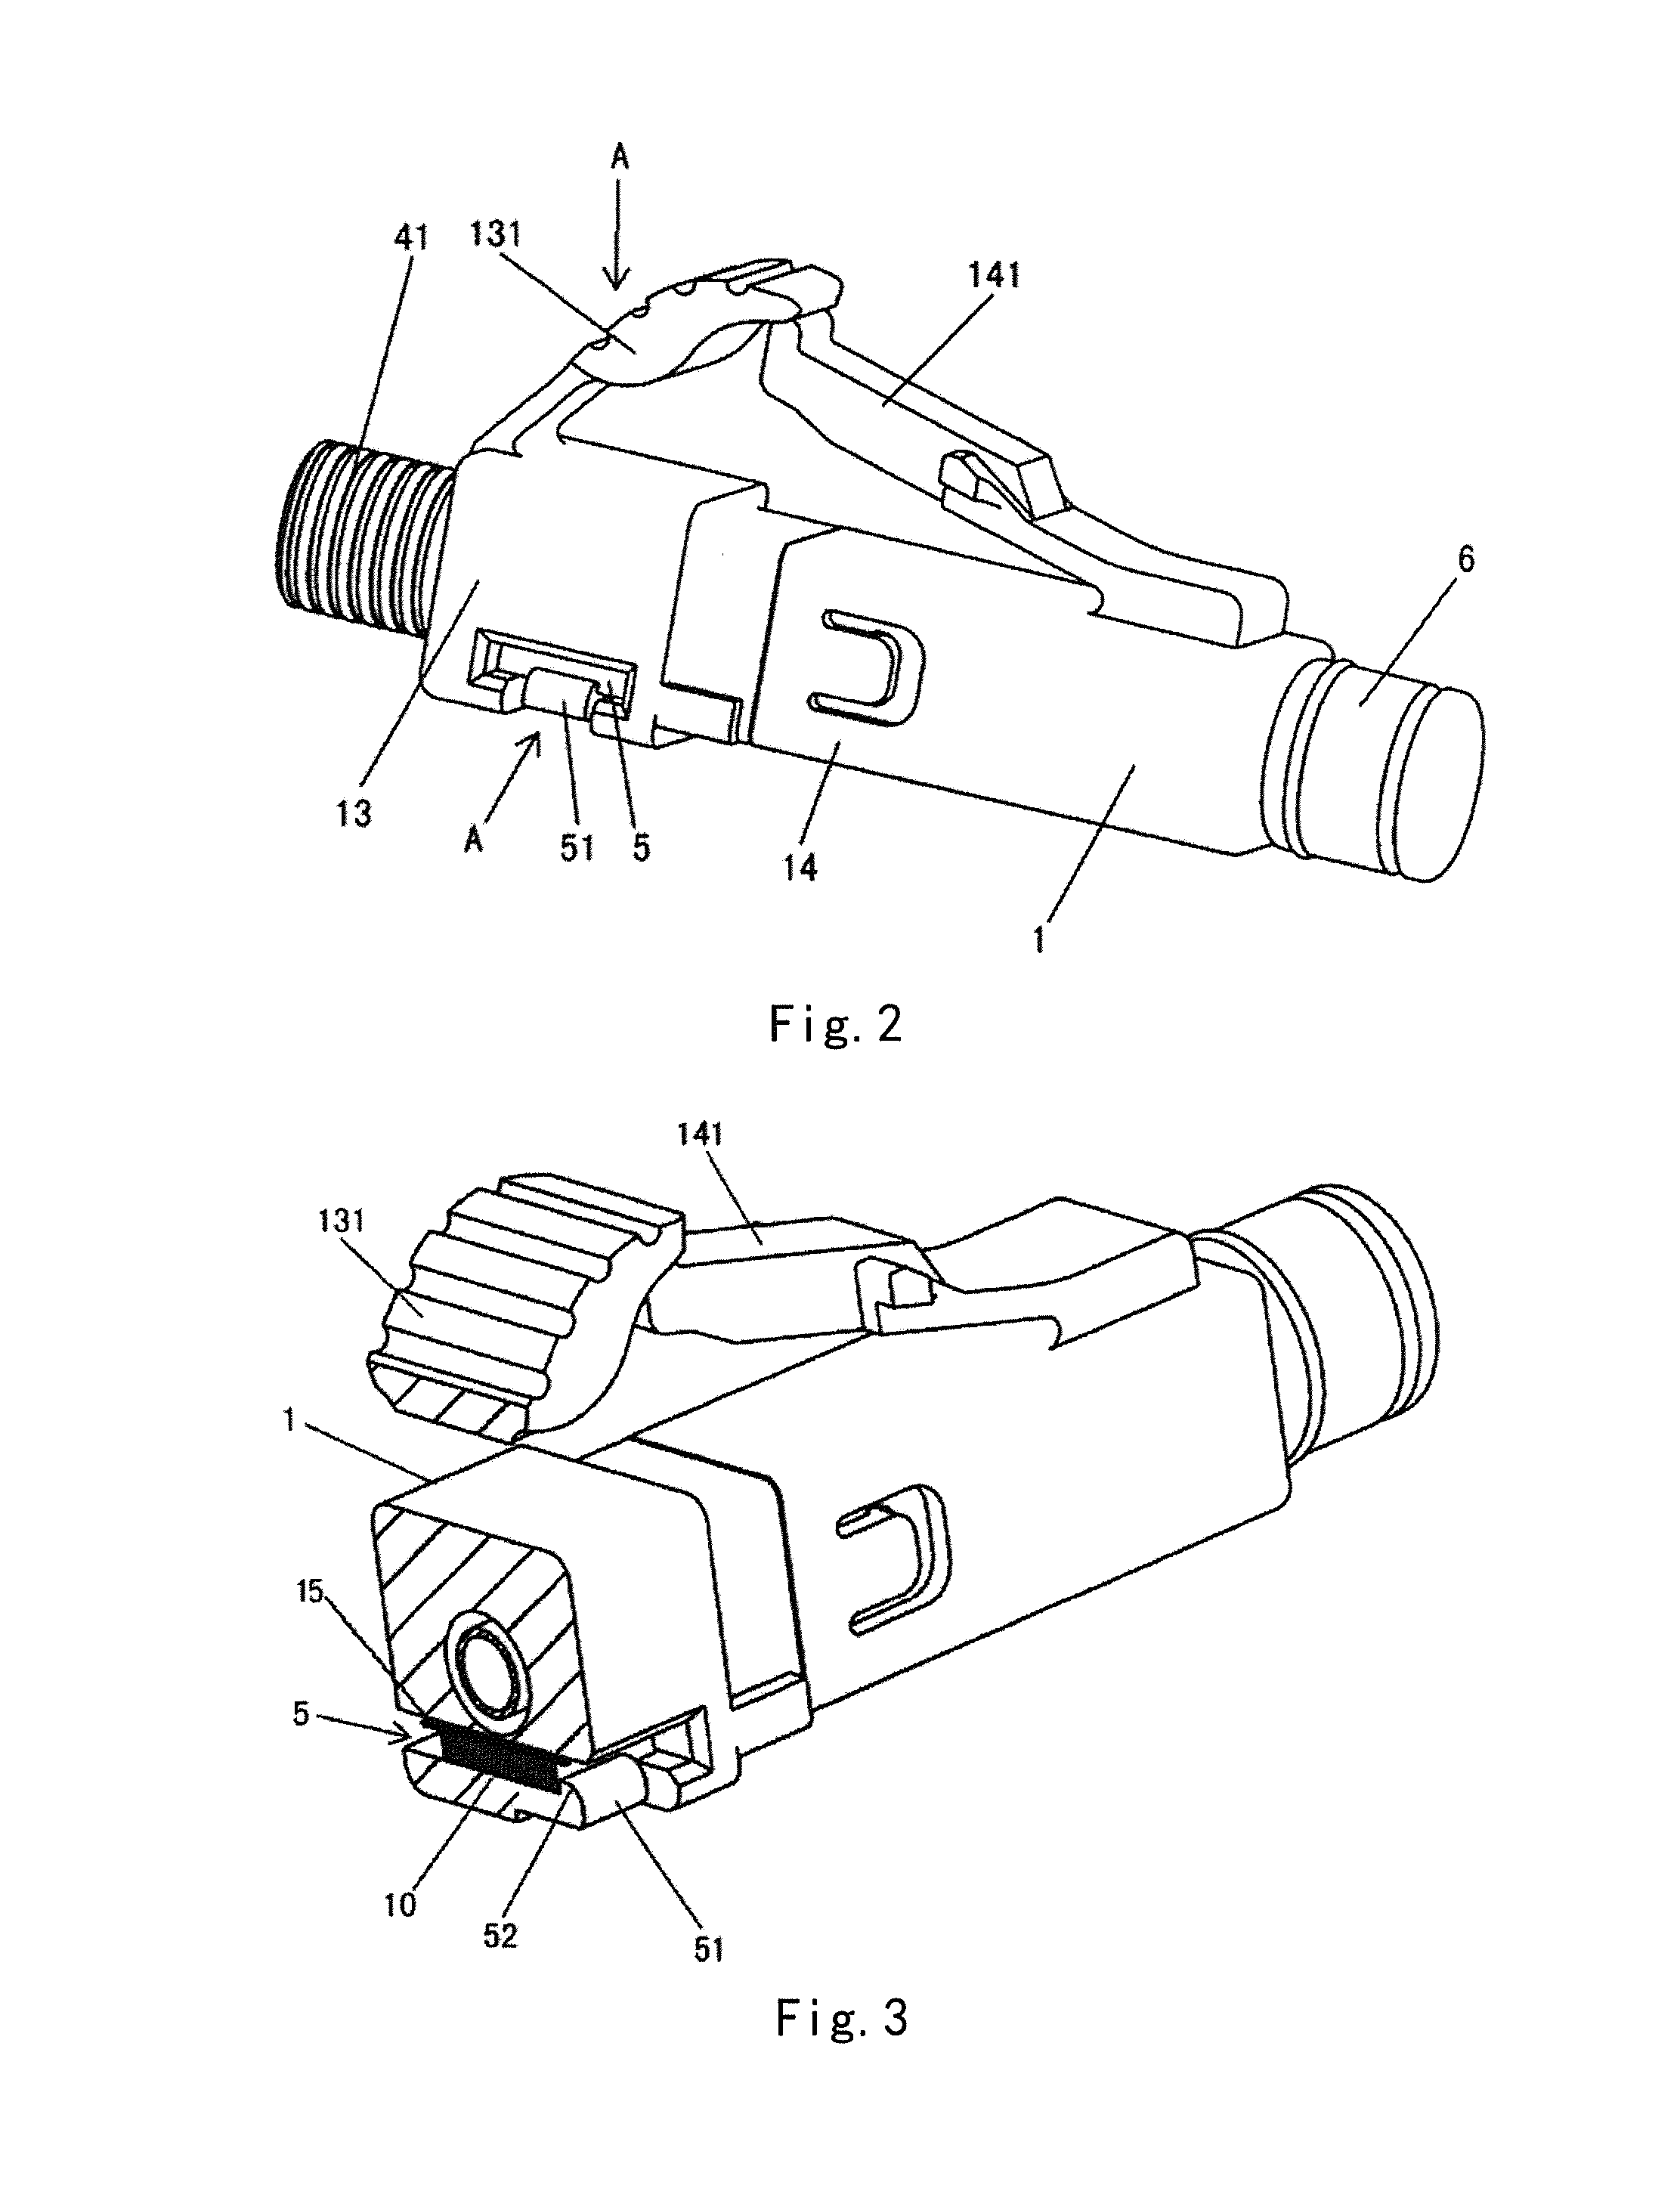 Fiber optic connector having radio frequency identficiation tag and optical fiber connection device